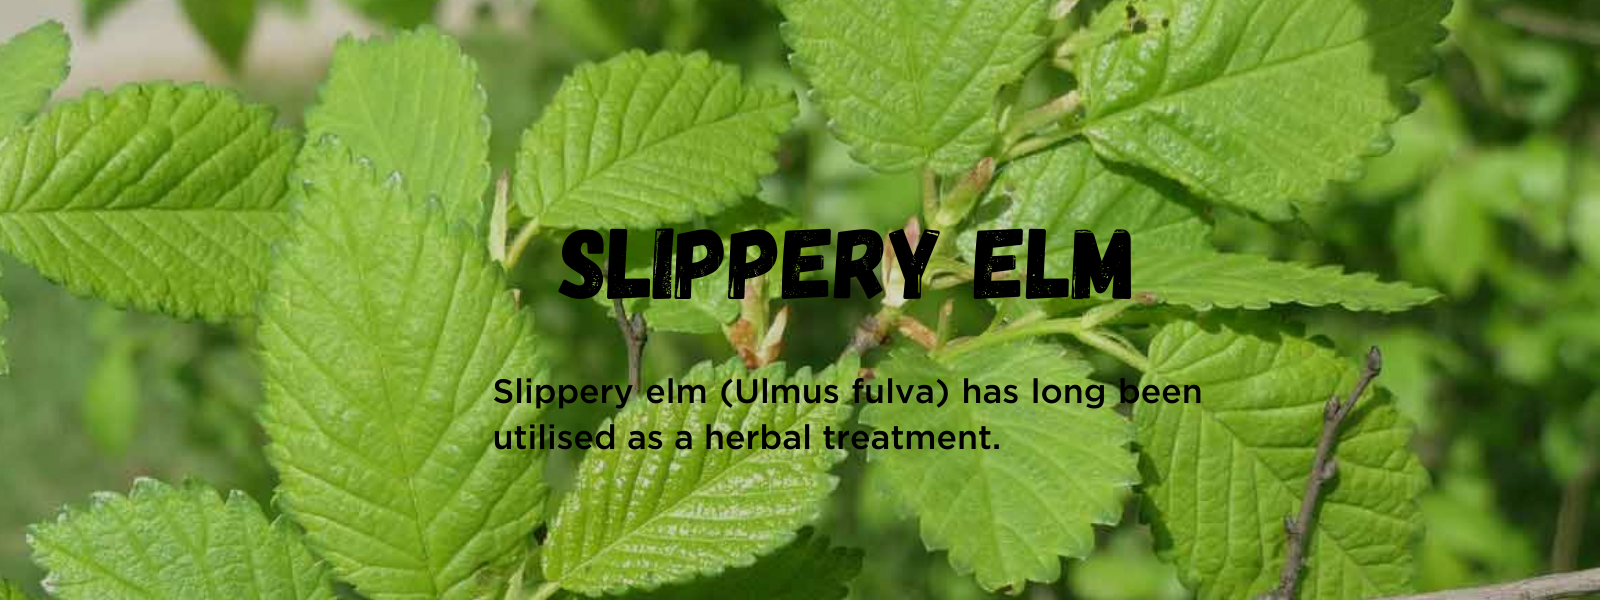 Slippery elm: Health Benefits, Uses and Important Facts